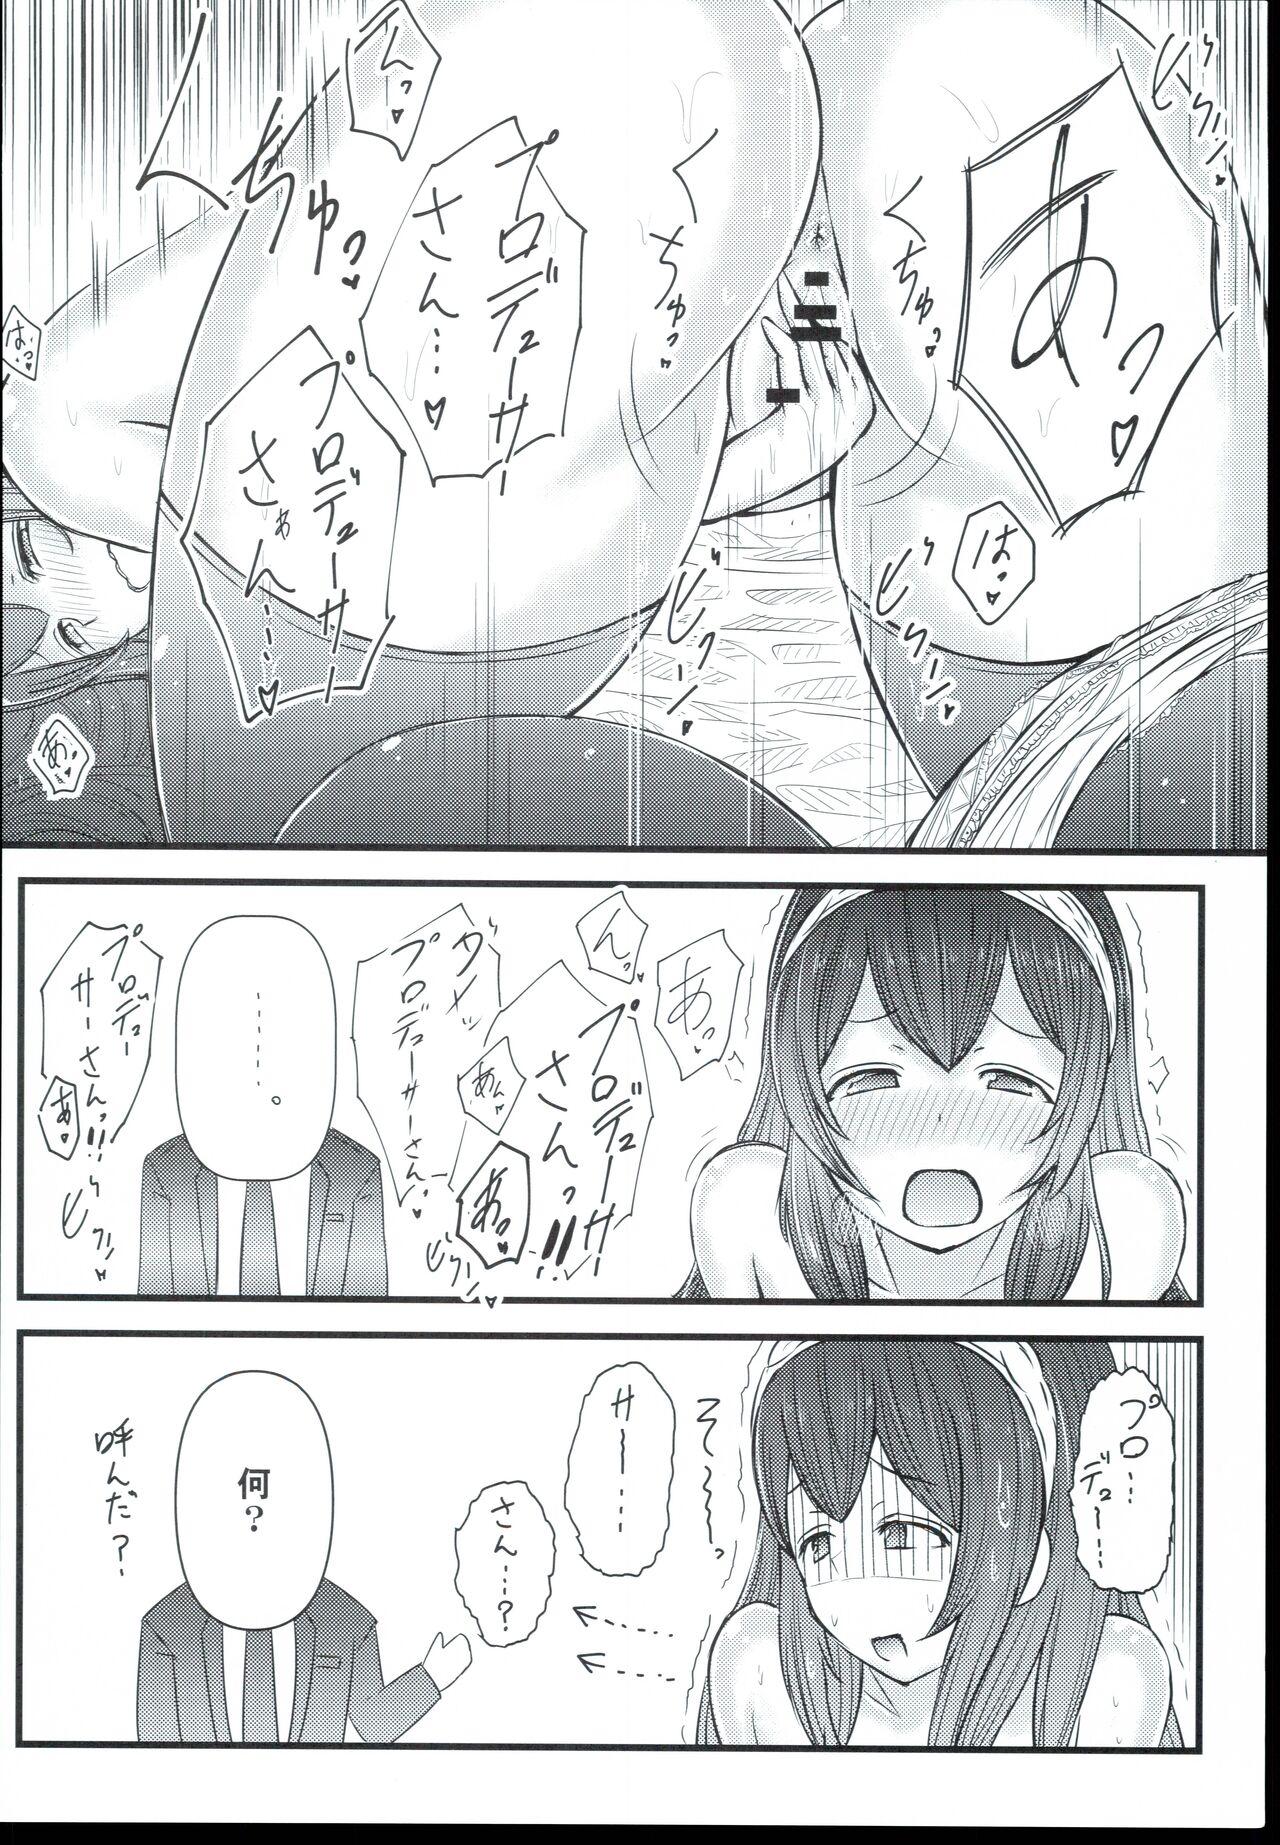 Madura Fumifumi? Fumifumi. Fumifumi... Fumifumi!! - The idolmaster Jerking - Page 8